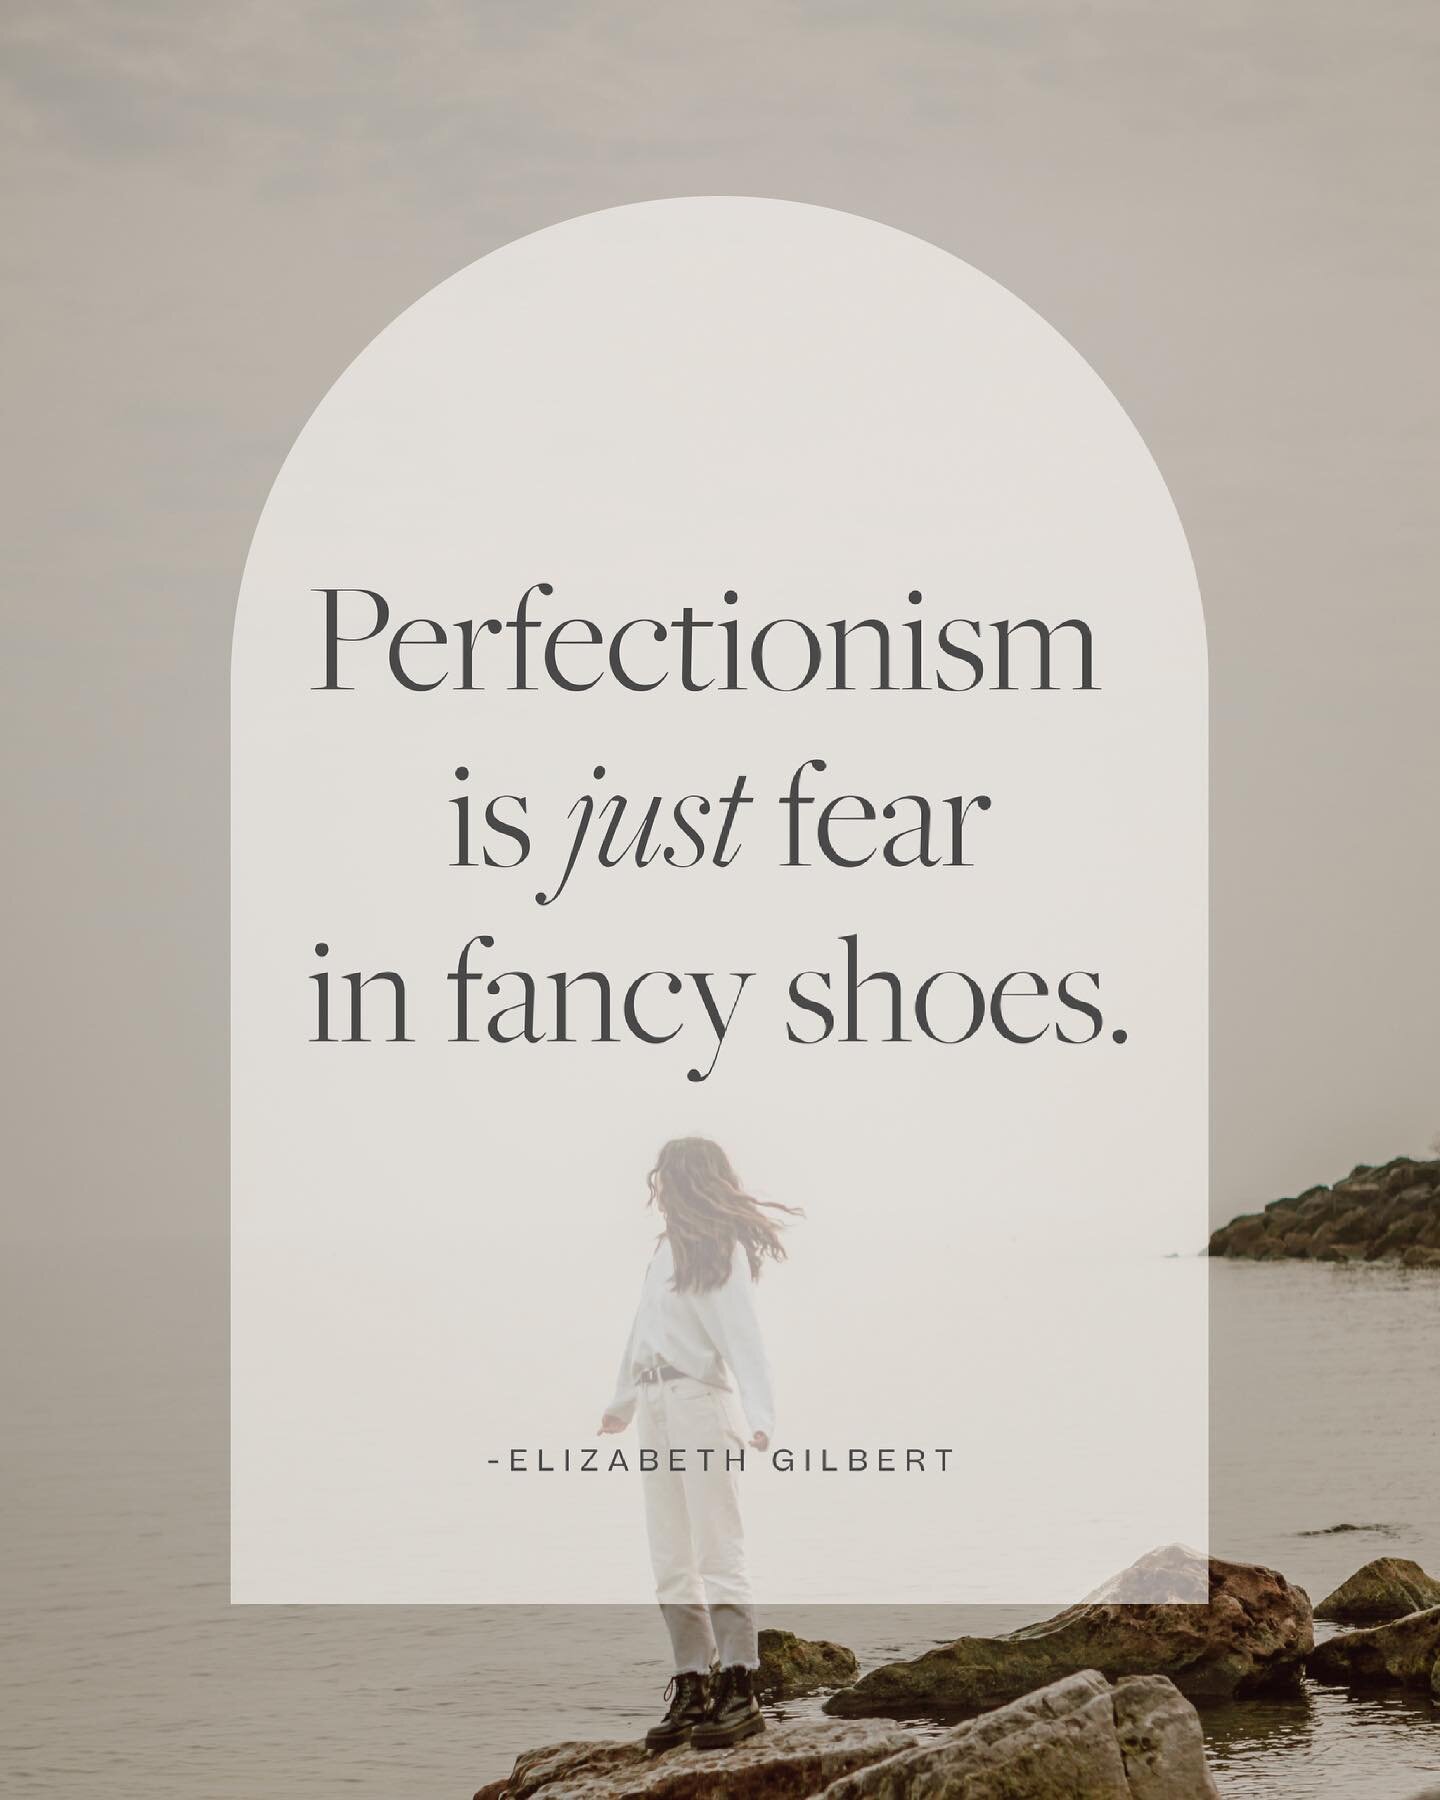 &ldquo;I think perfectionism is just fear in fancy shoes and a mink coat pretending to be elegant and actually is just terrified, because underneath that shiny veneer perfectionism is nothing more than a deep existential angst that says again and aga